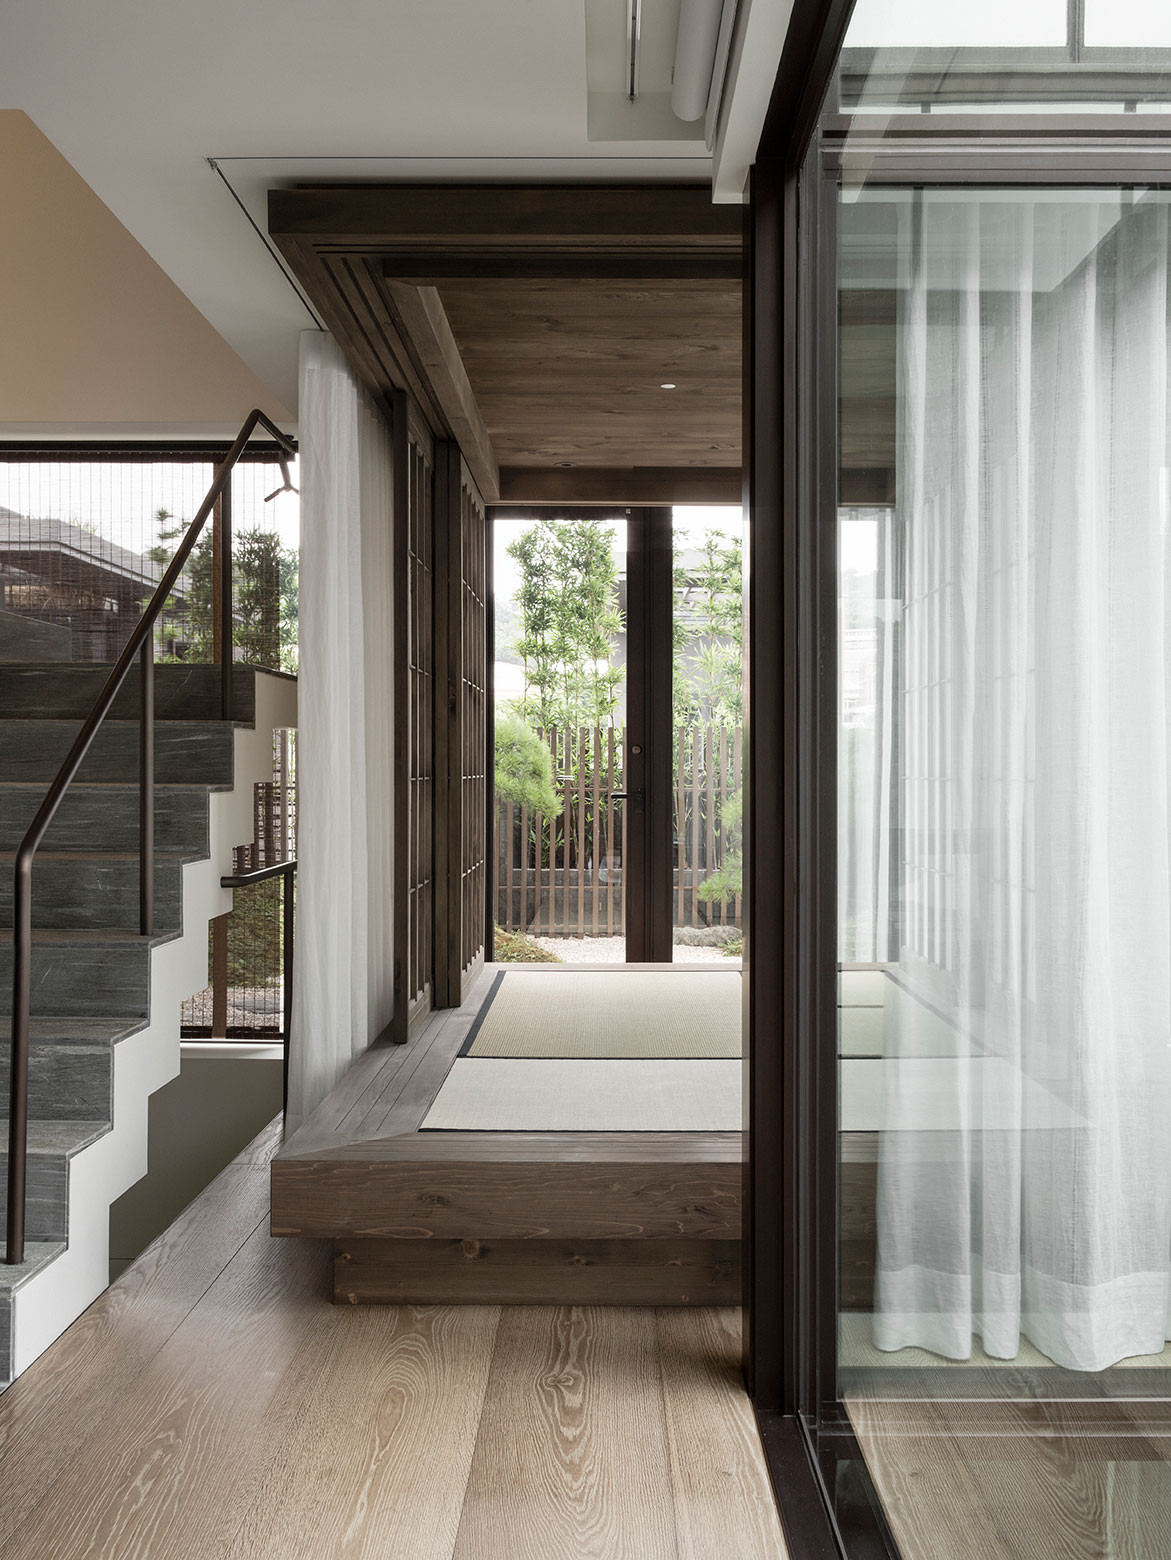 Taipei House by Valerie Rostaing